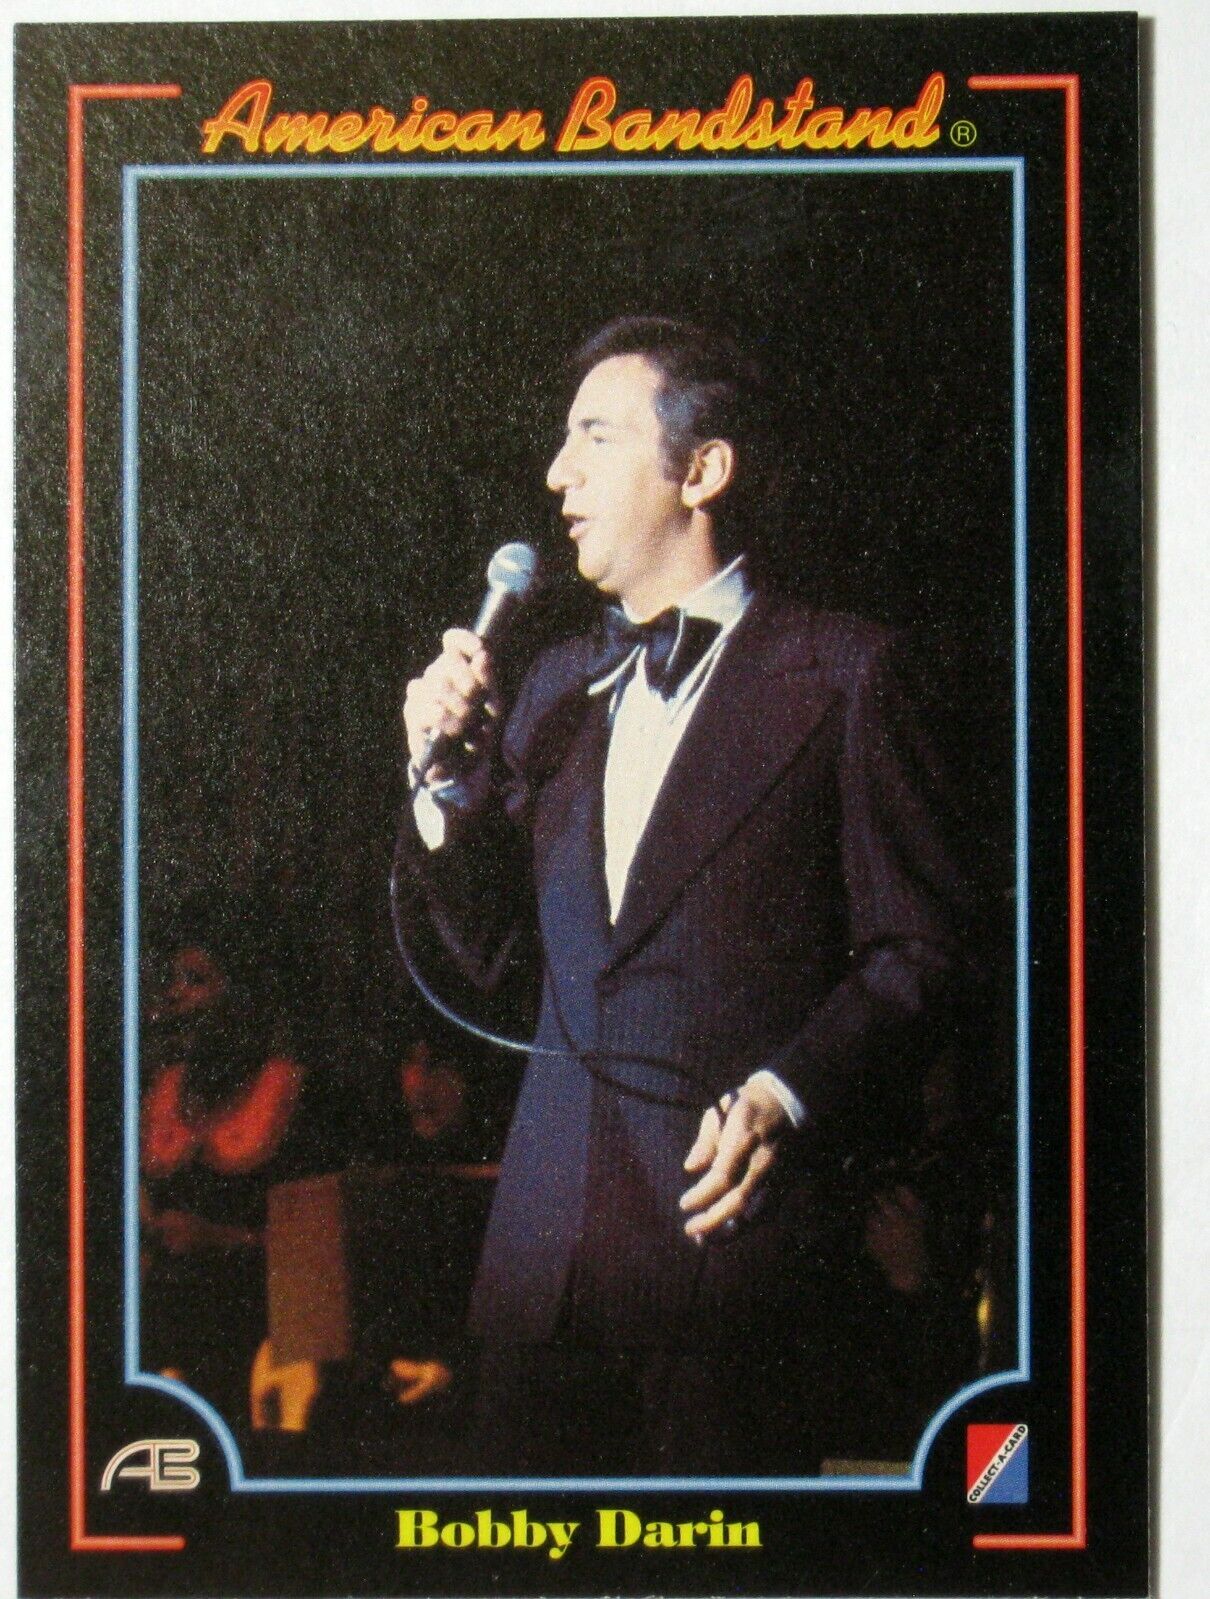 1993 Collect-A-Card American Bandstand Bobby Darin #6